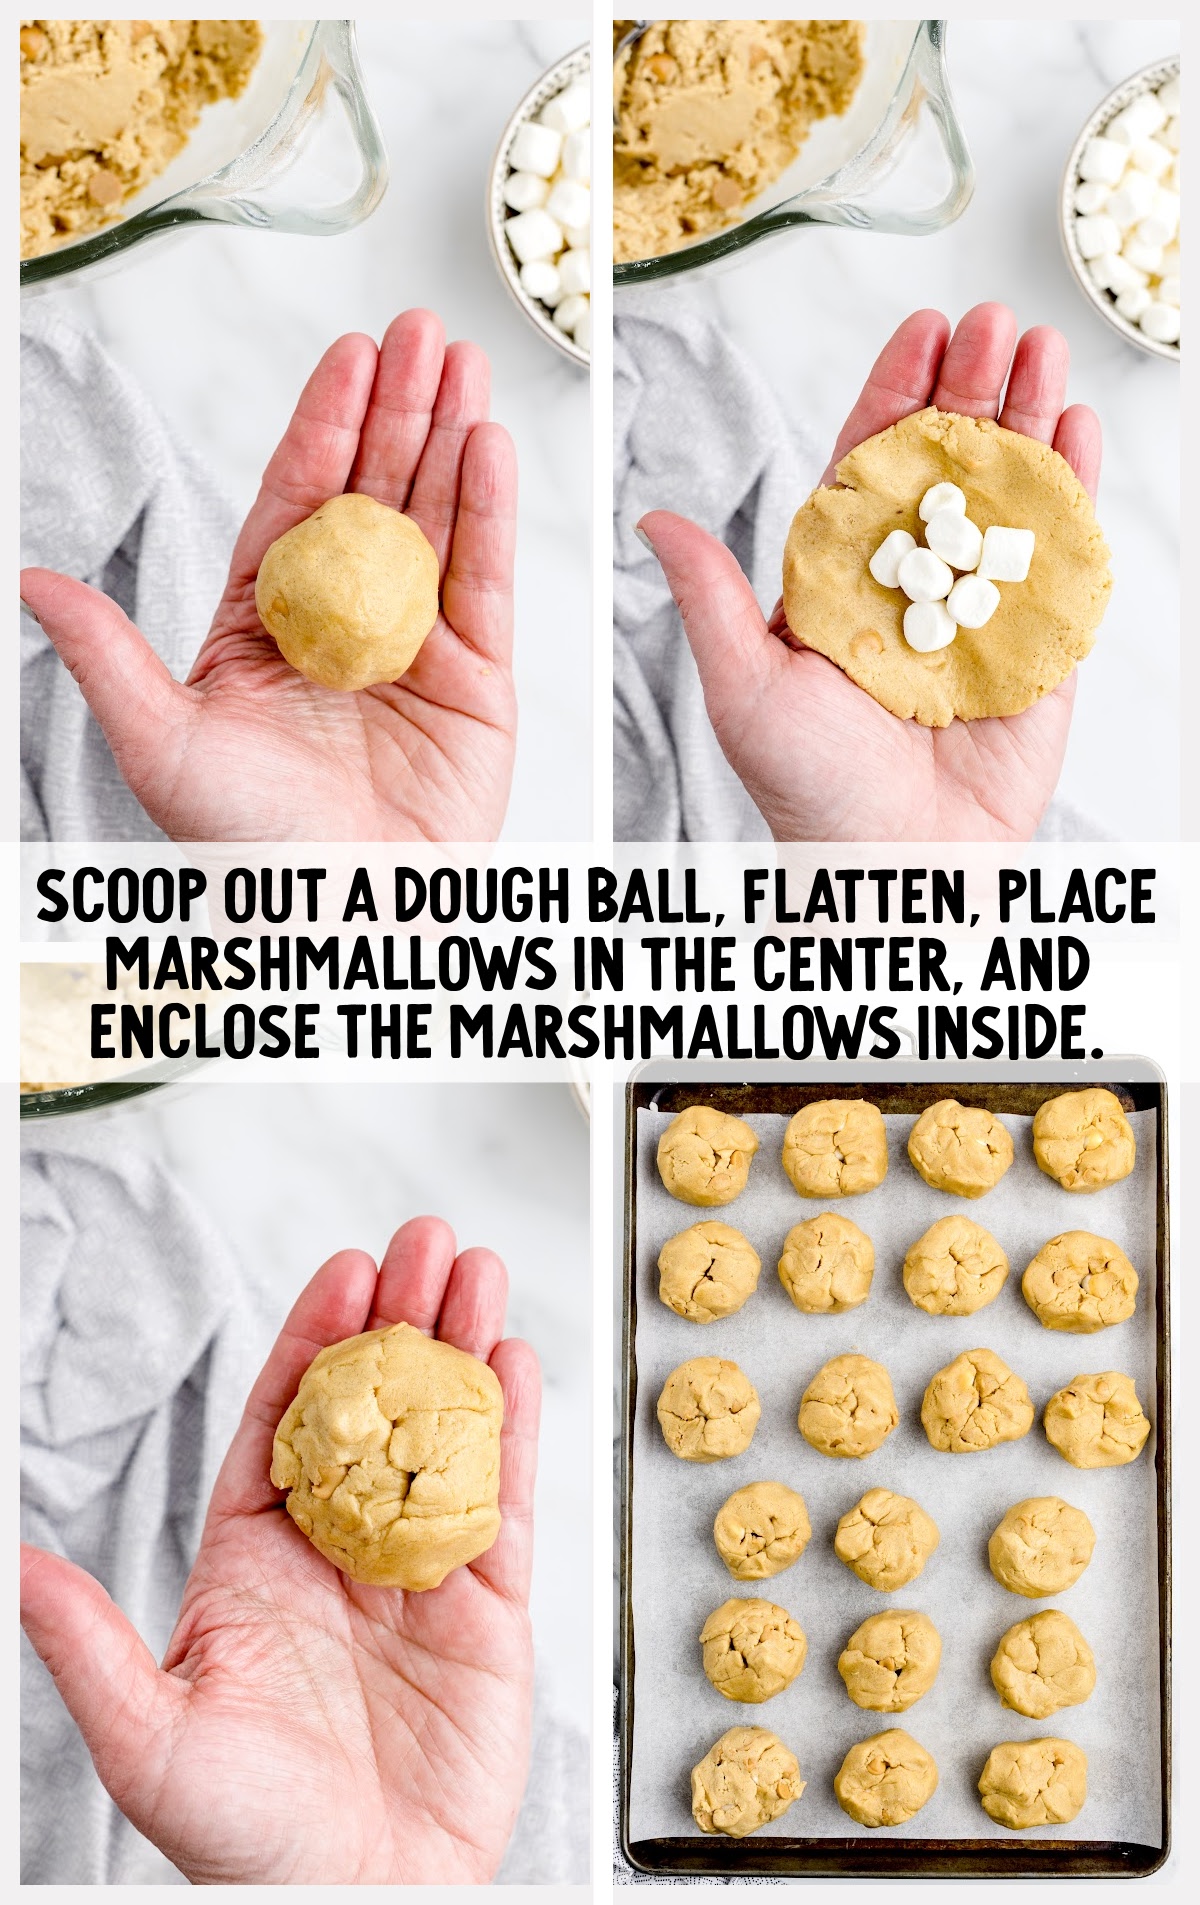 flatten dough and place marshmallow inside and enclose marshmallow